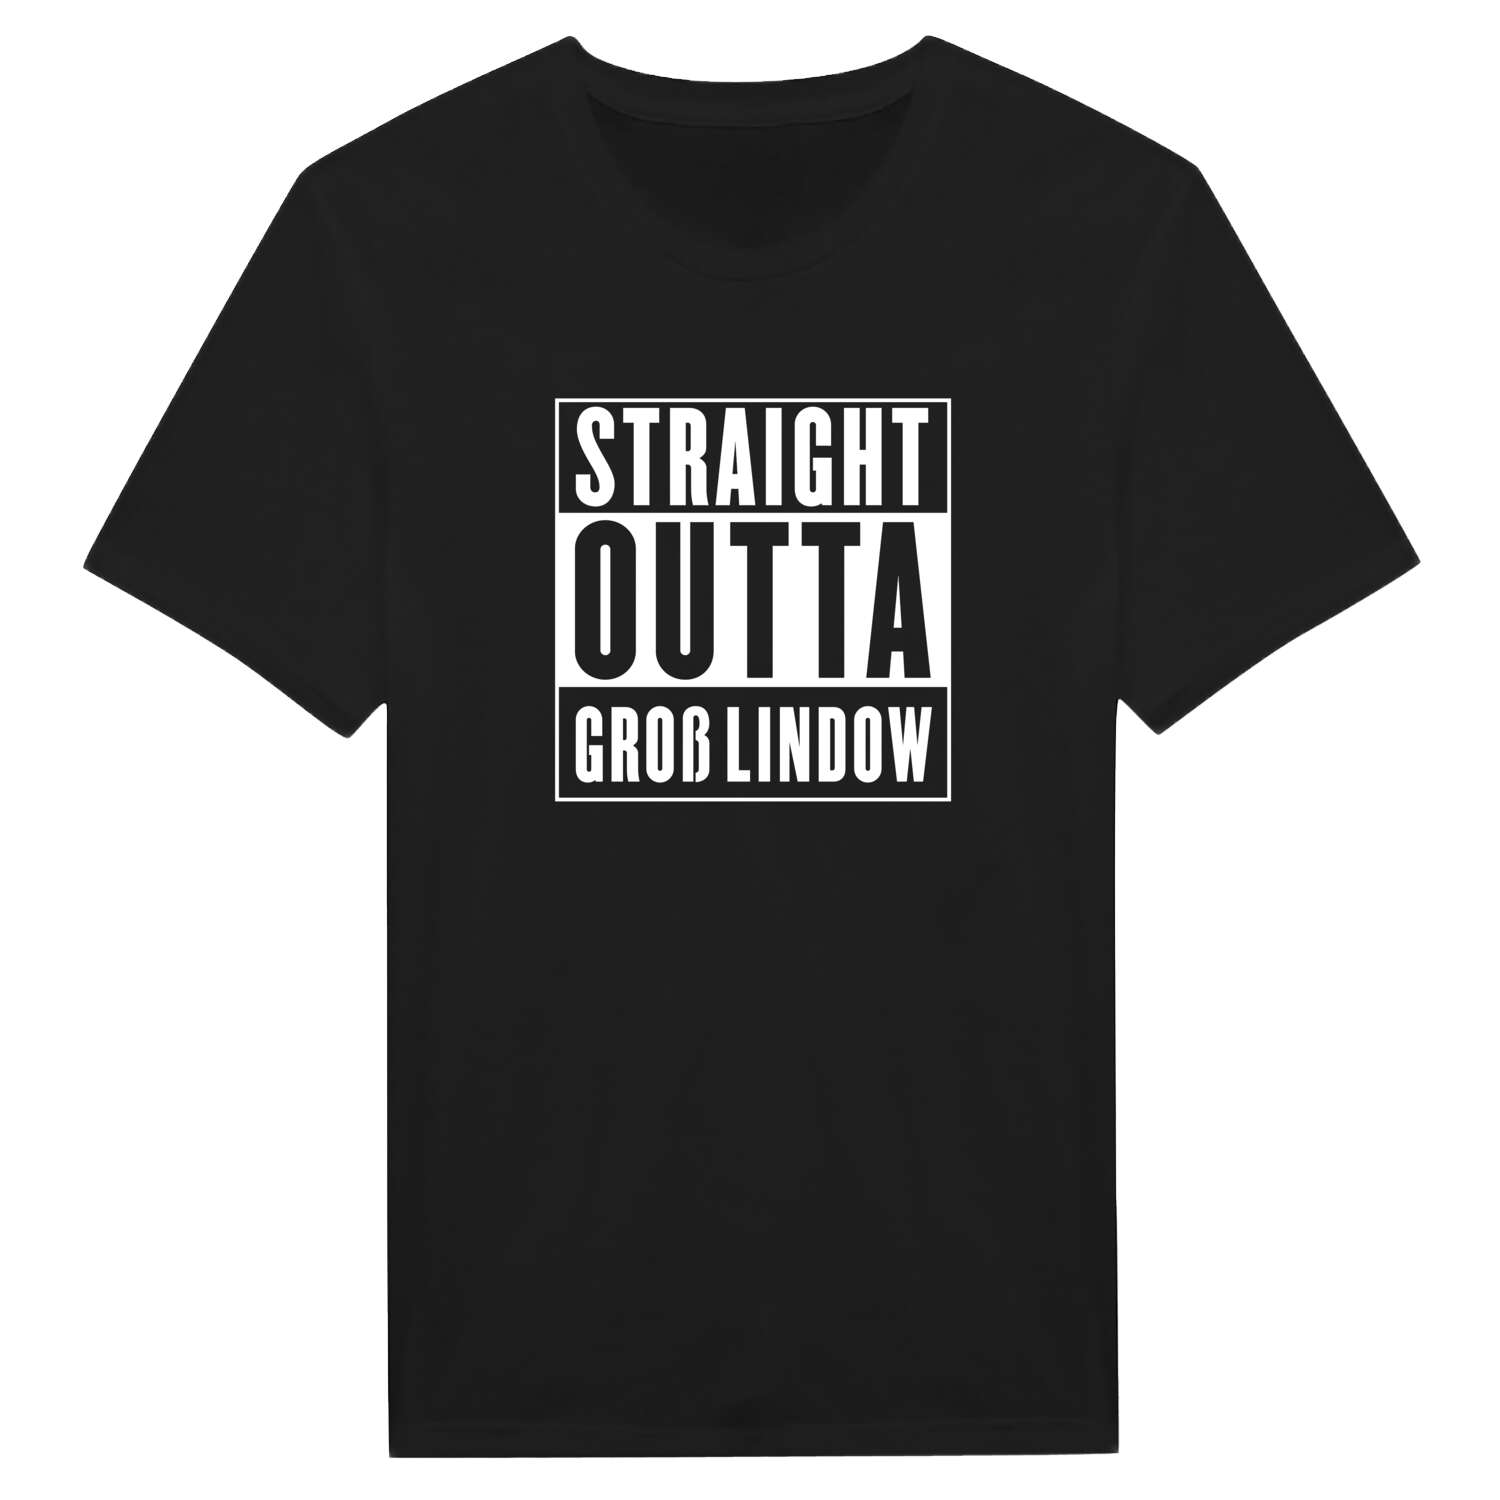 Groß Lindow T-Shirt »Straight Outta«